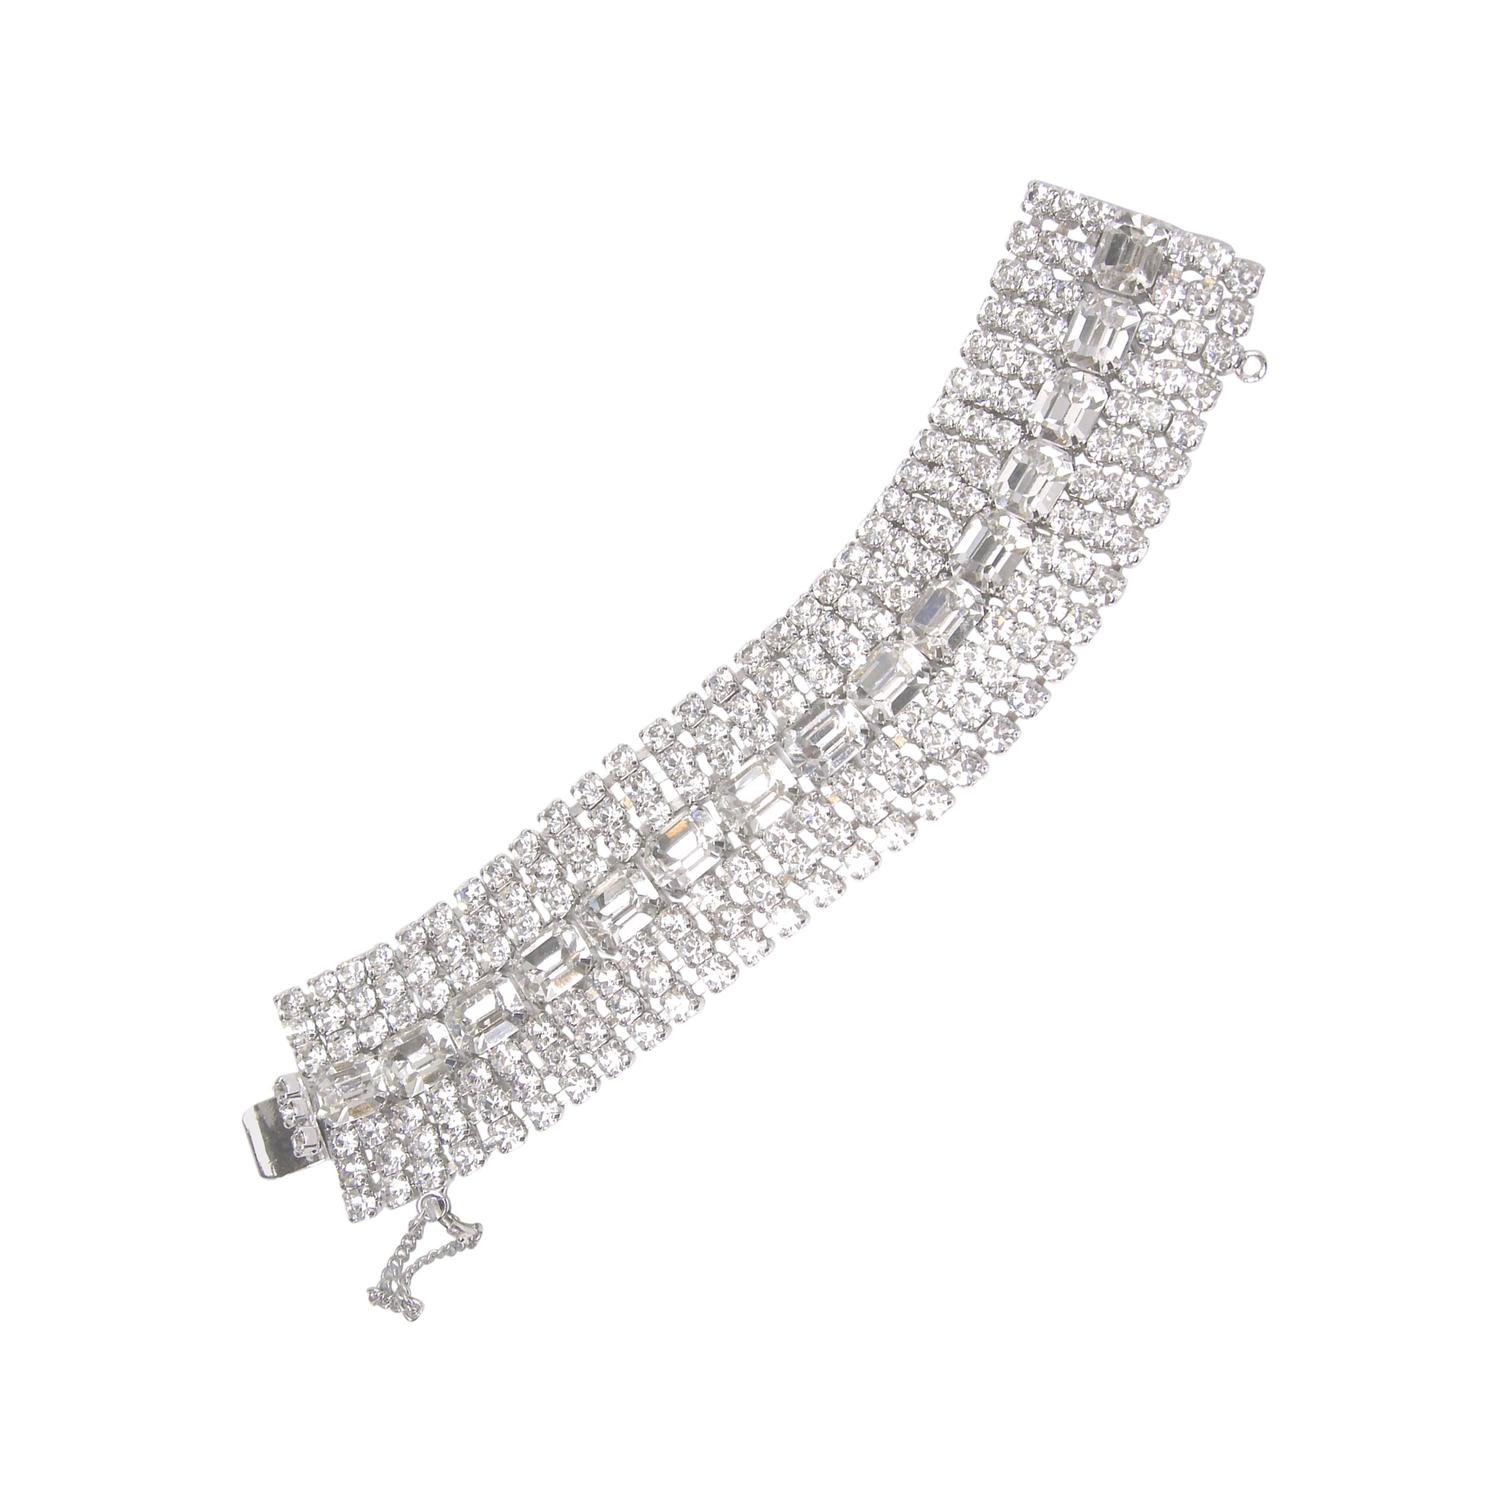 Vintage Signed Weiss Clear Rhinestone Bracelet For Sale at 1stdibs